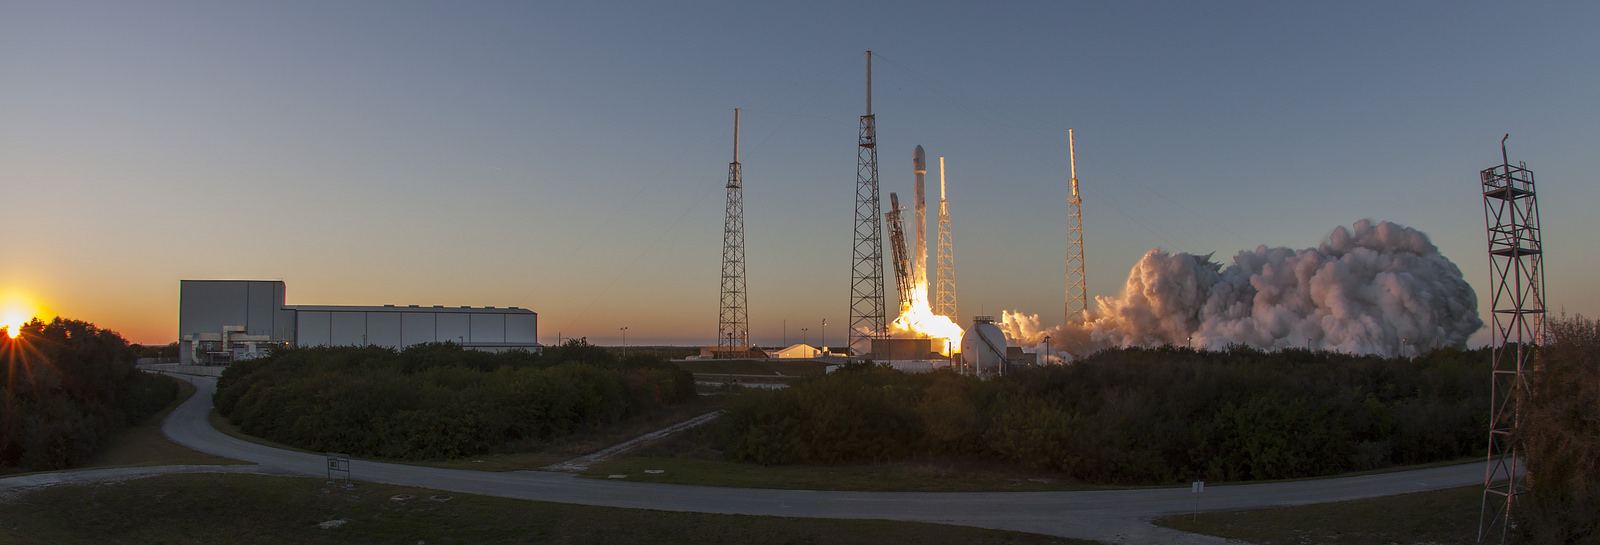 spacex2 Falcon 9 lifted off from SpaceX Launch Complex